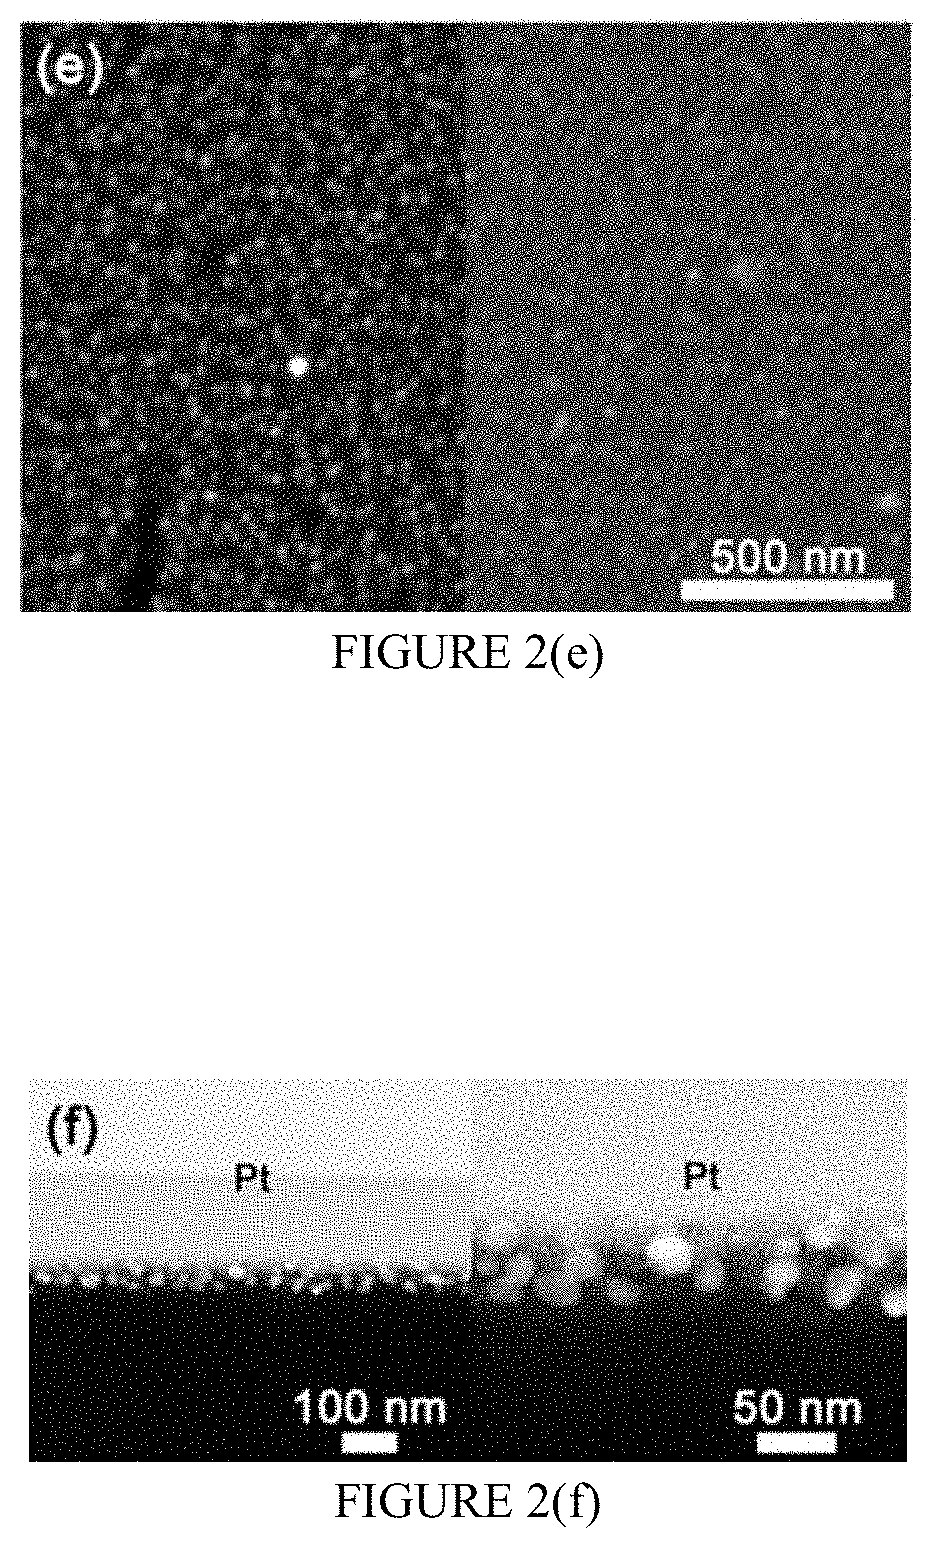 Injection metal assisted catalytic etching